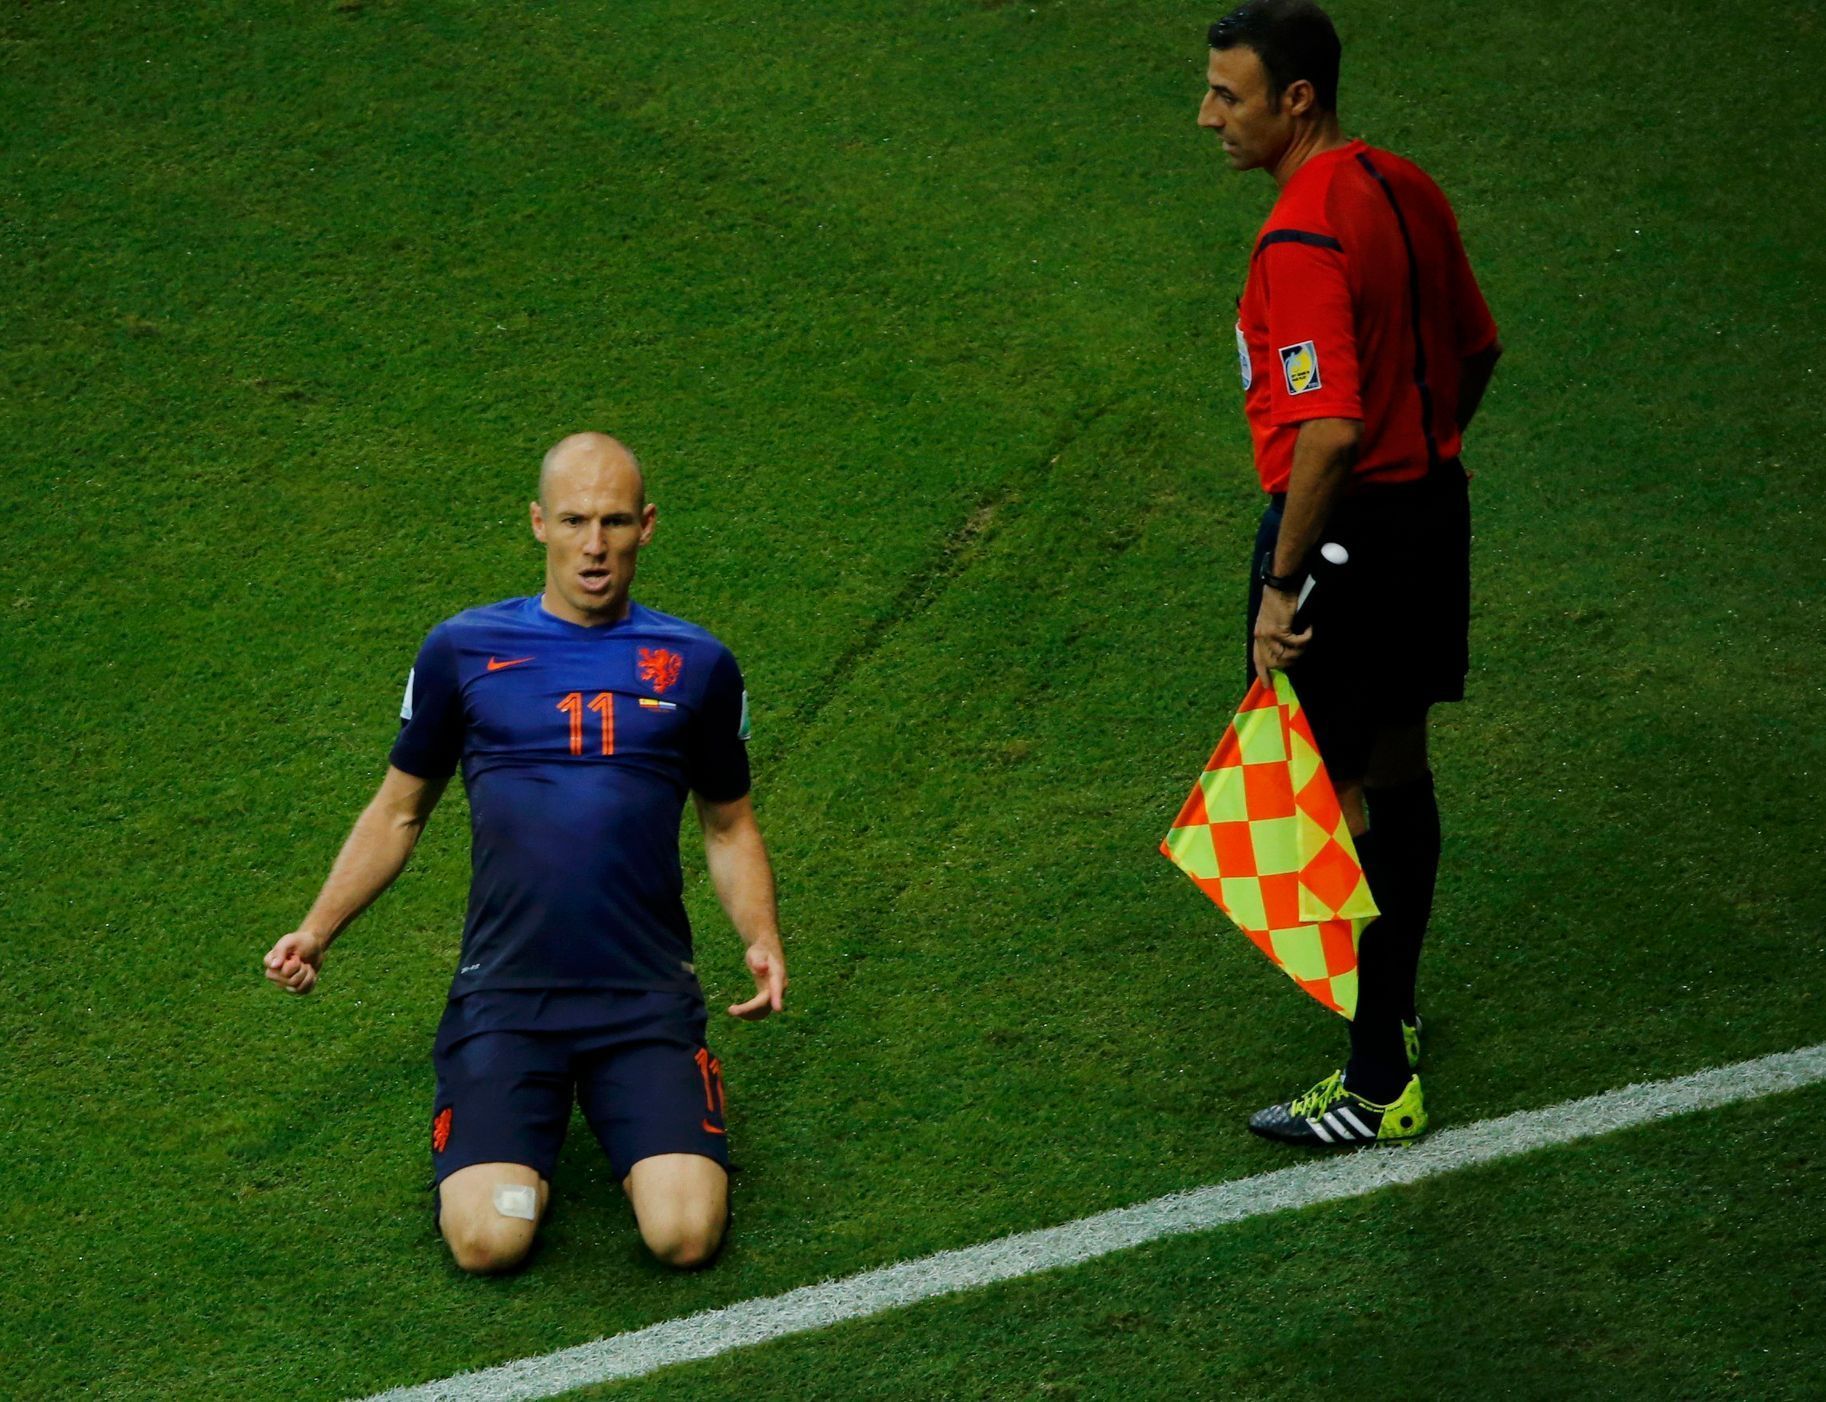 Robben of the Netherlands celebrates next to first assistant referee Faverani after scoring a goal during their 2014 World Cup Group B match against Spain at the Fonte Nova arena in Salvador